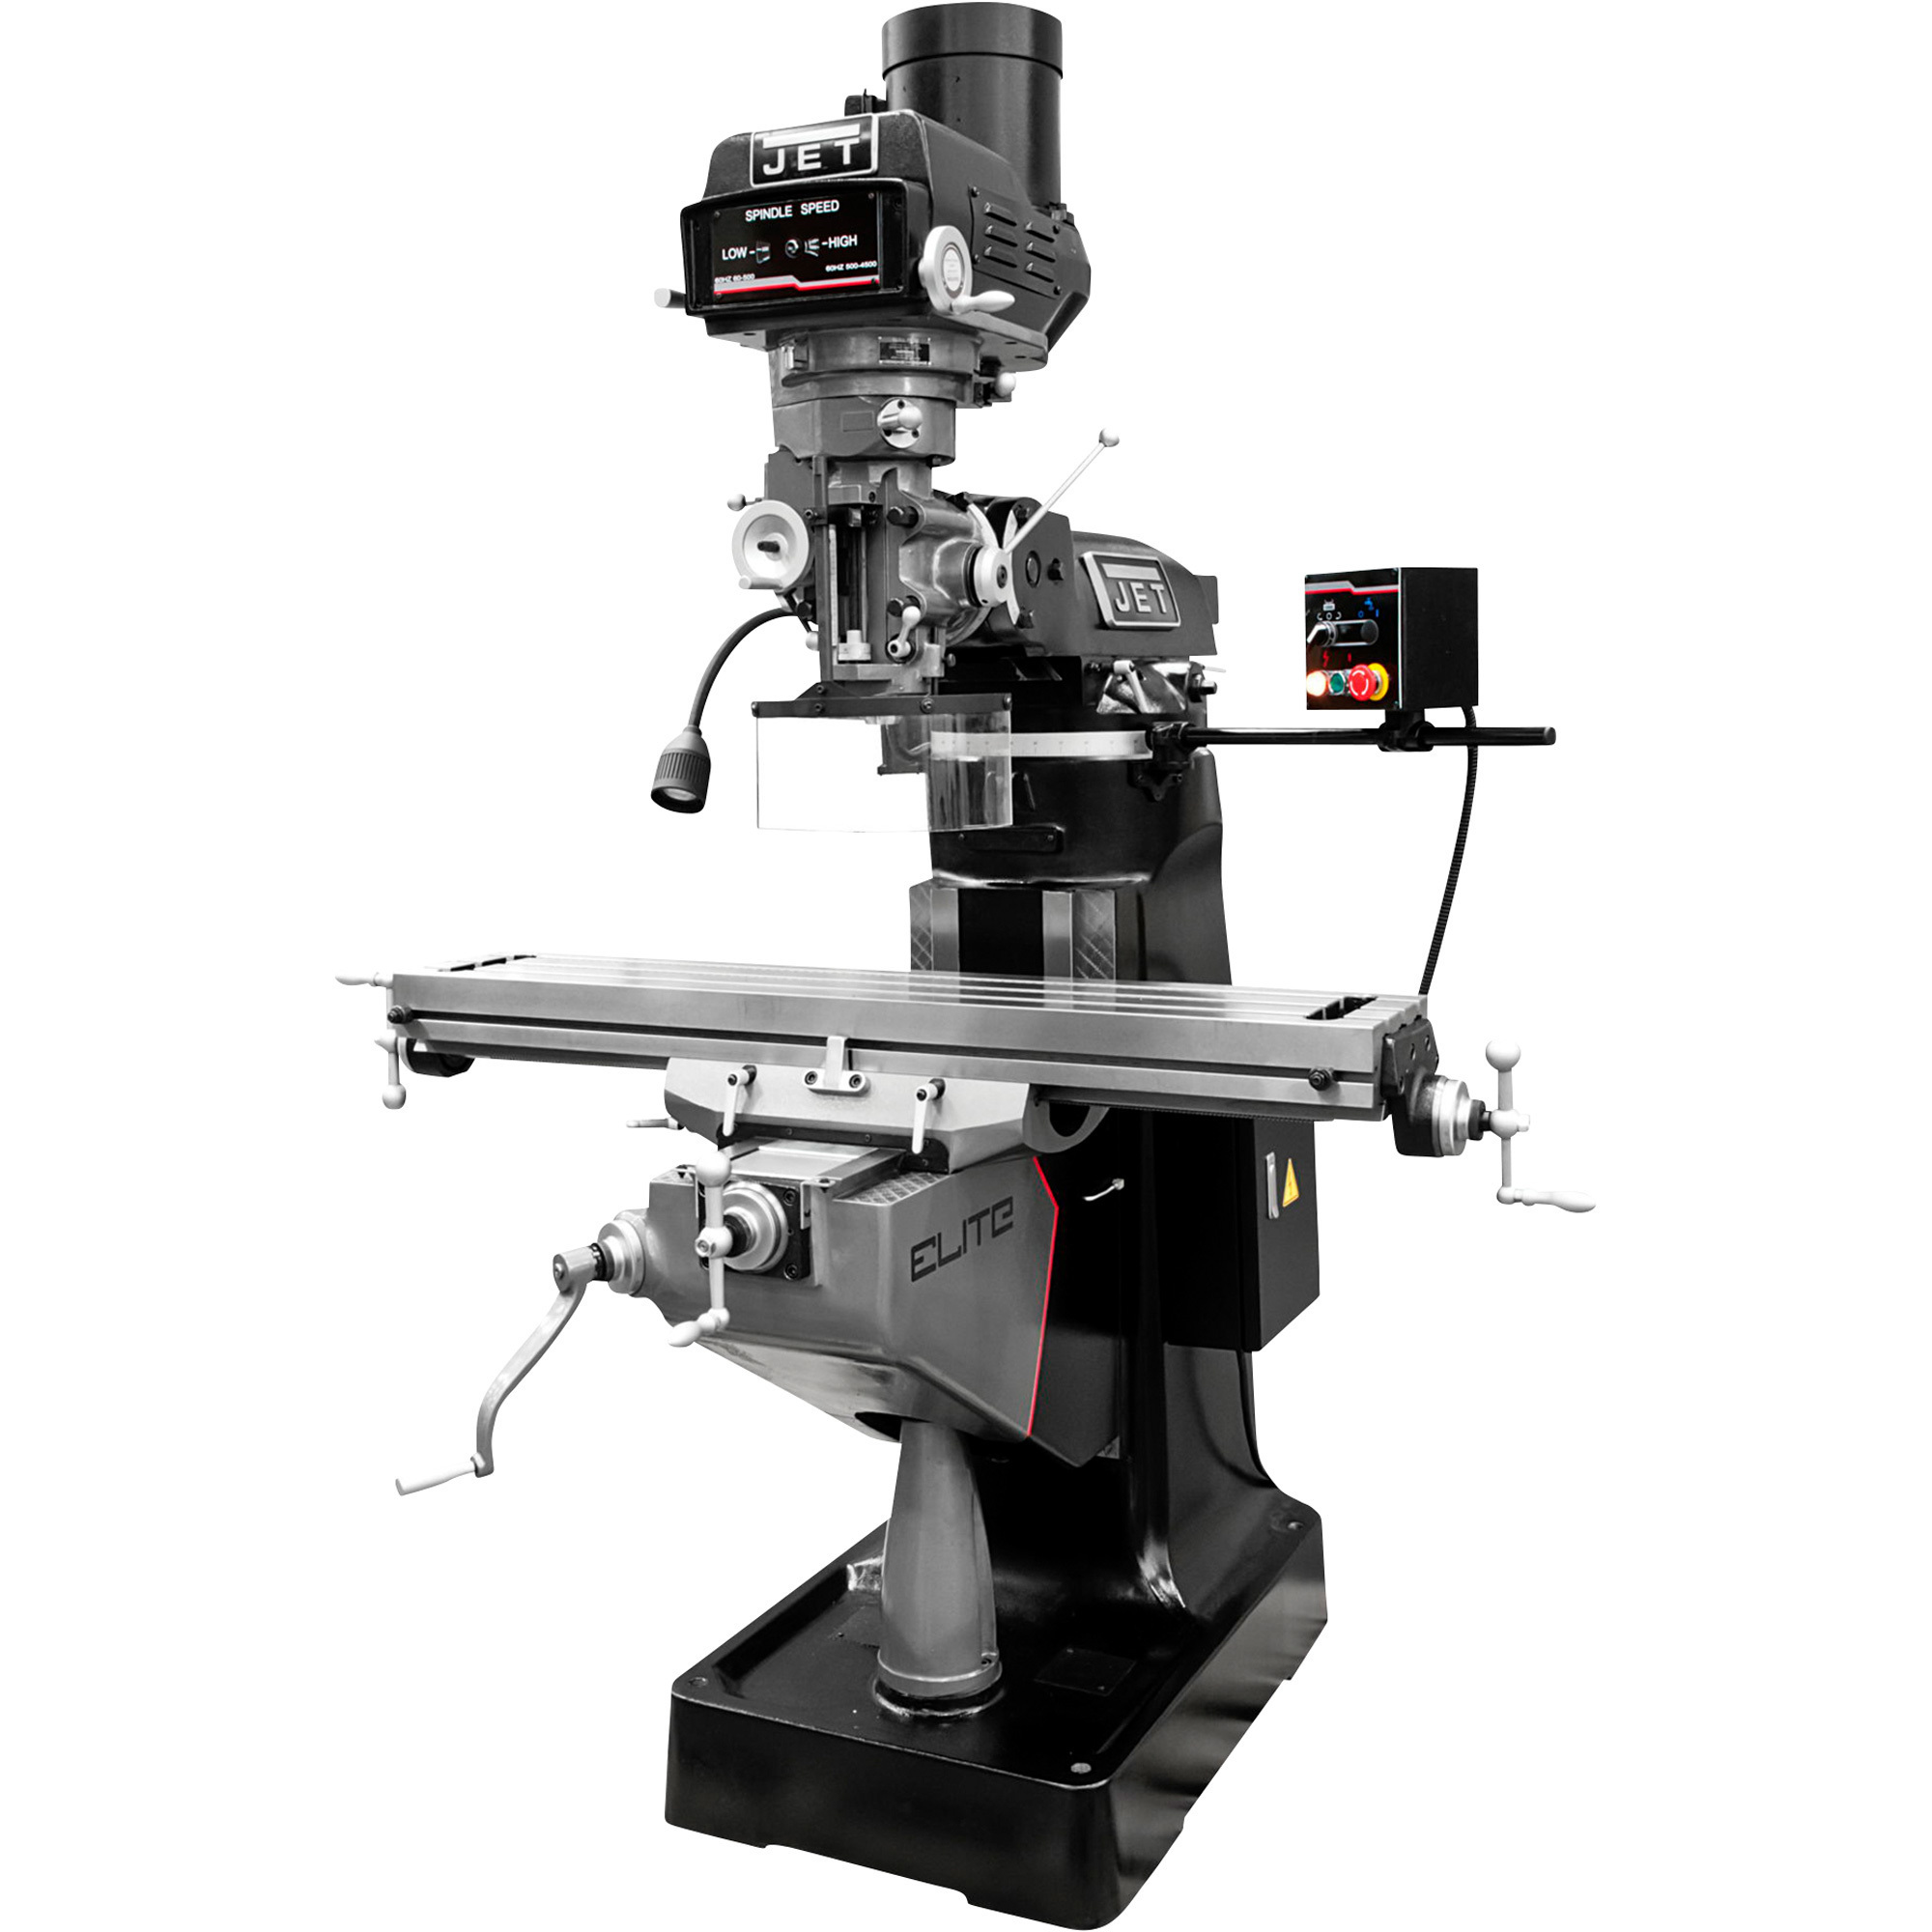 JET Elite Mill with 2-Axis ACU-RITE 203 DRO, X, Y, Z-Axis Powerfeeds and Power Air Draw Bar, 9Inch x 49Inch Table, 3 HP, Model ETM-949 -  894115